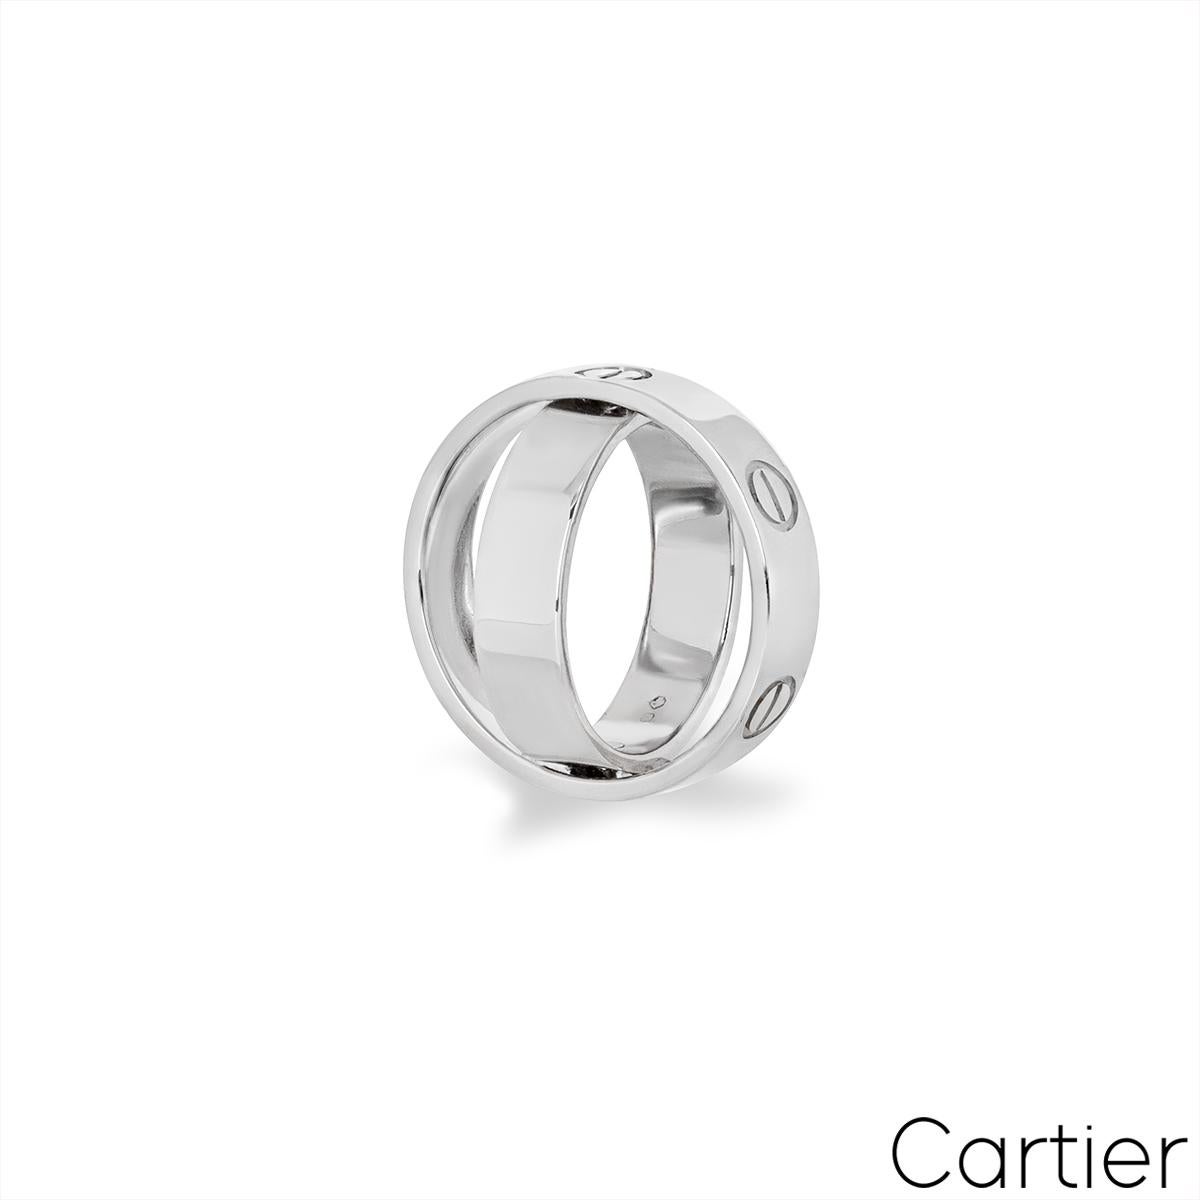 A unique 18k white gold Spicy Love ring by Cartier. The ring comprises of two rings that pivot on hinges that open up and can be also worn as a pendant. The outer band displays 6 iconic screw motifs around the outside of the ring and the inner band